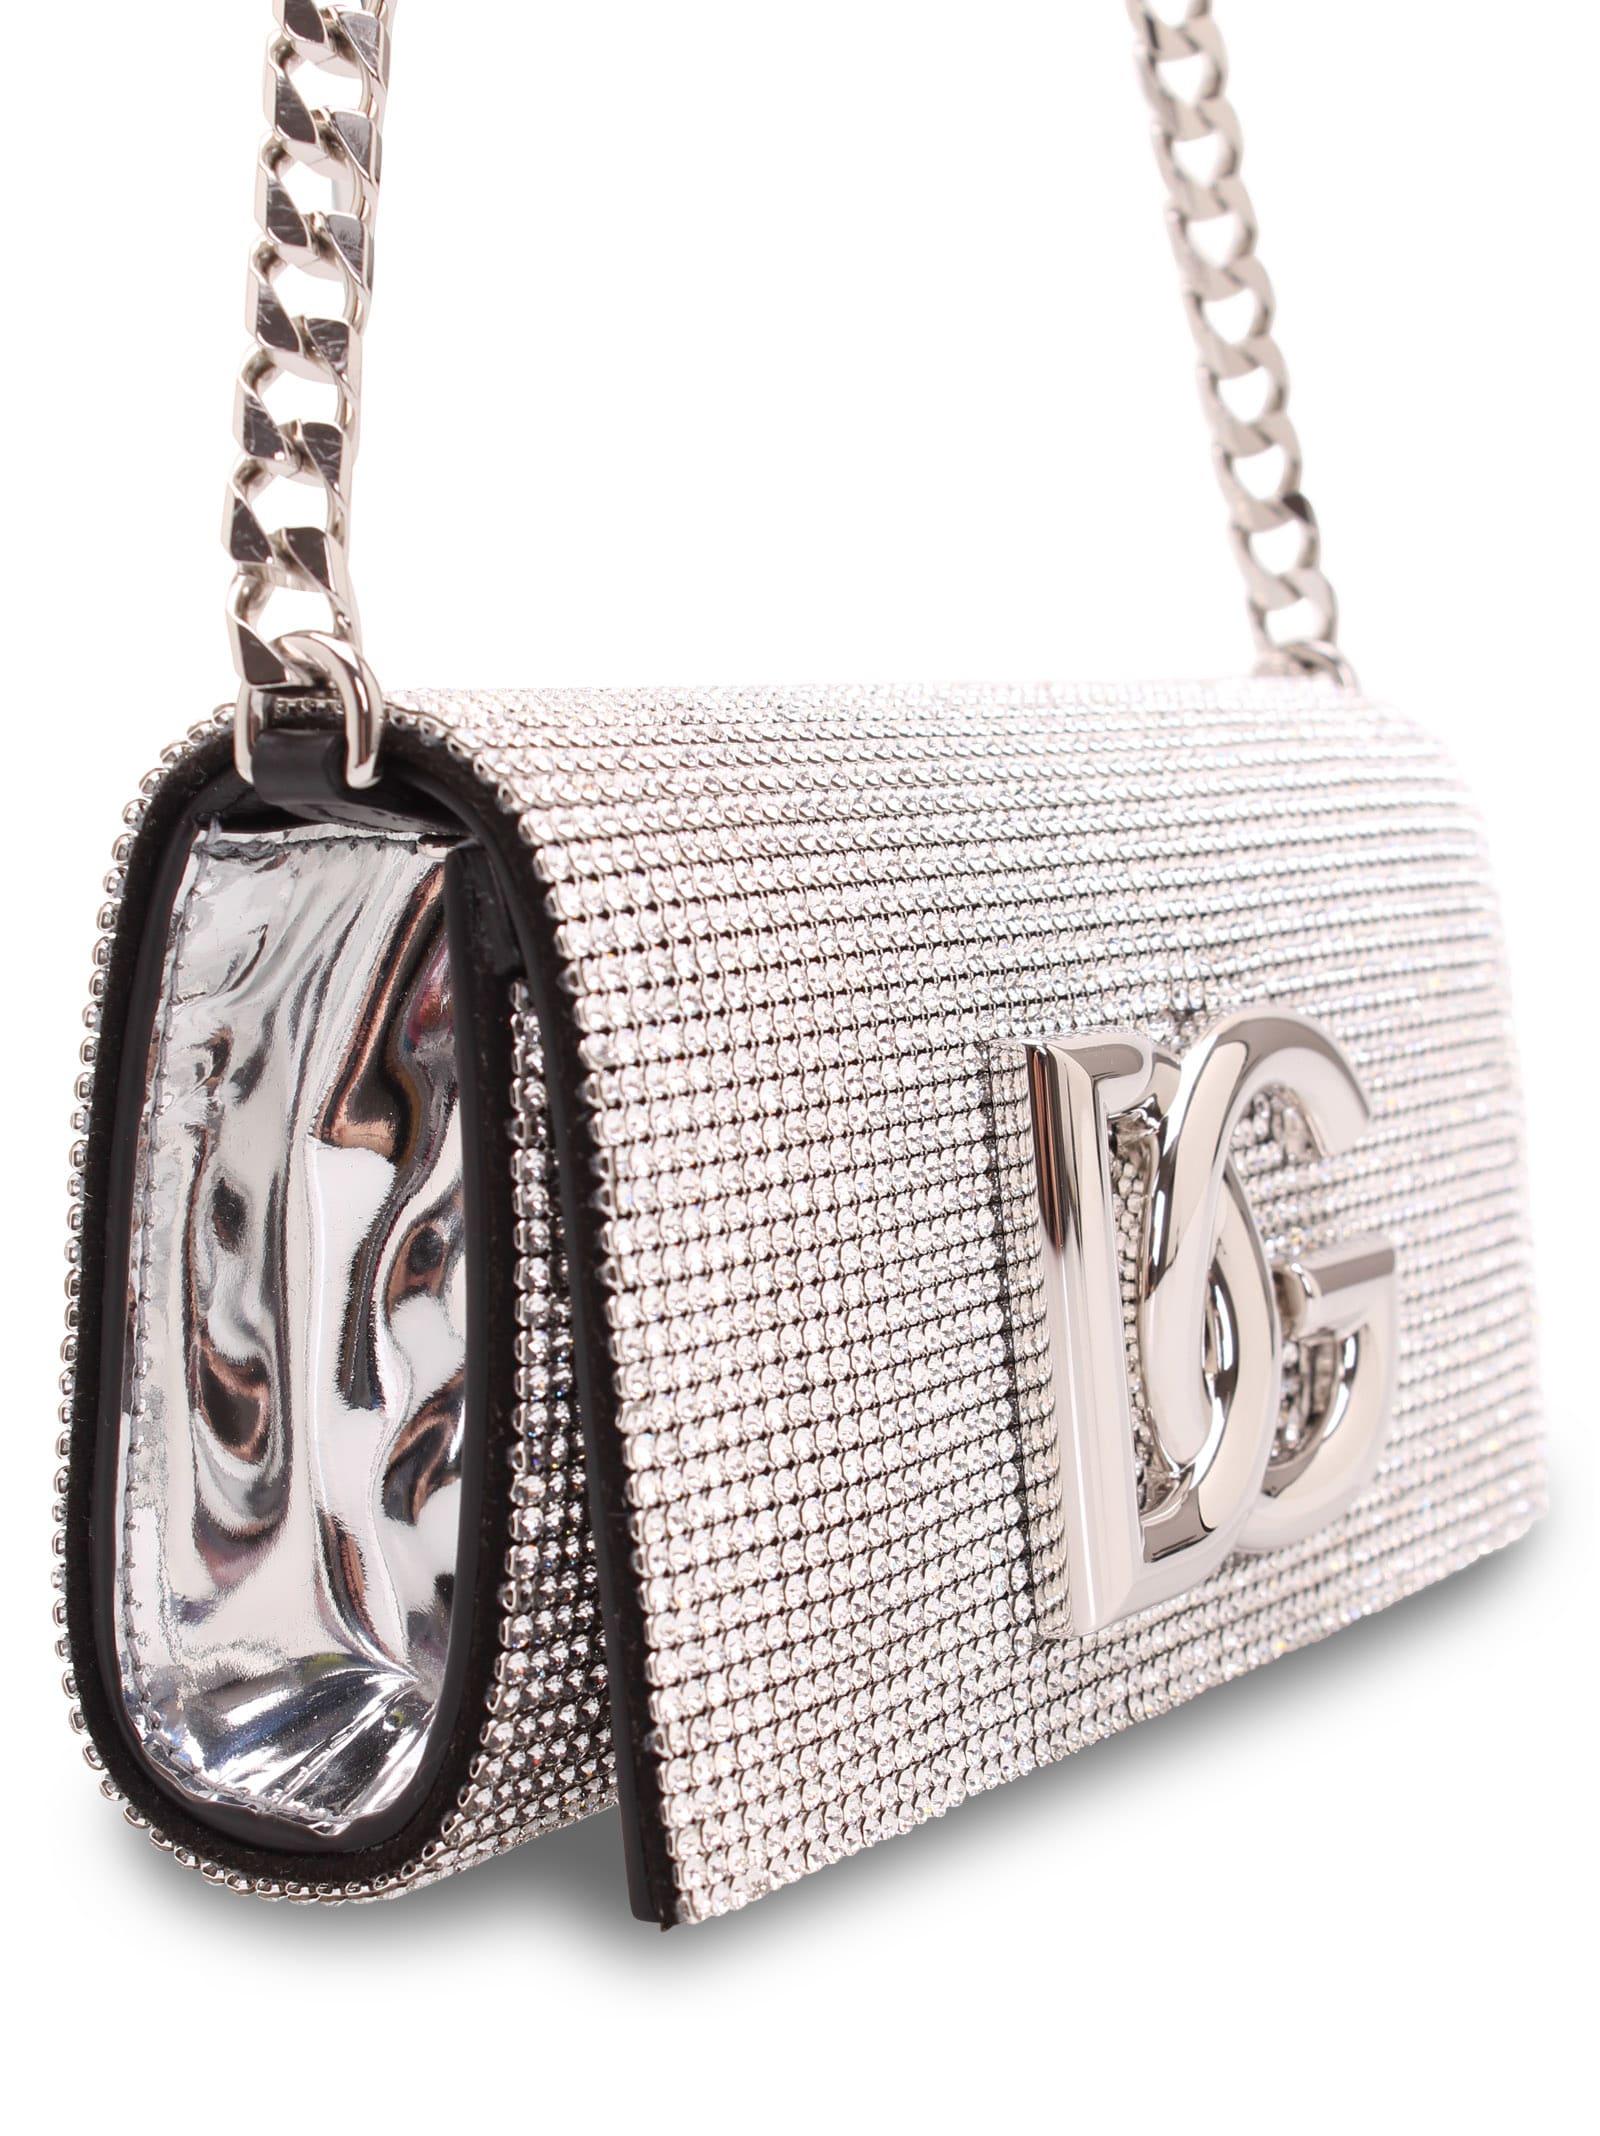 Dolce & Gabbana - Crystal Cage Clutch Bag Chain Necklace Silver